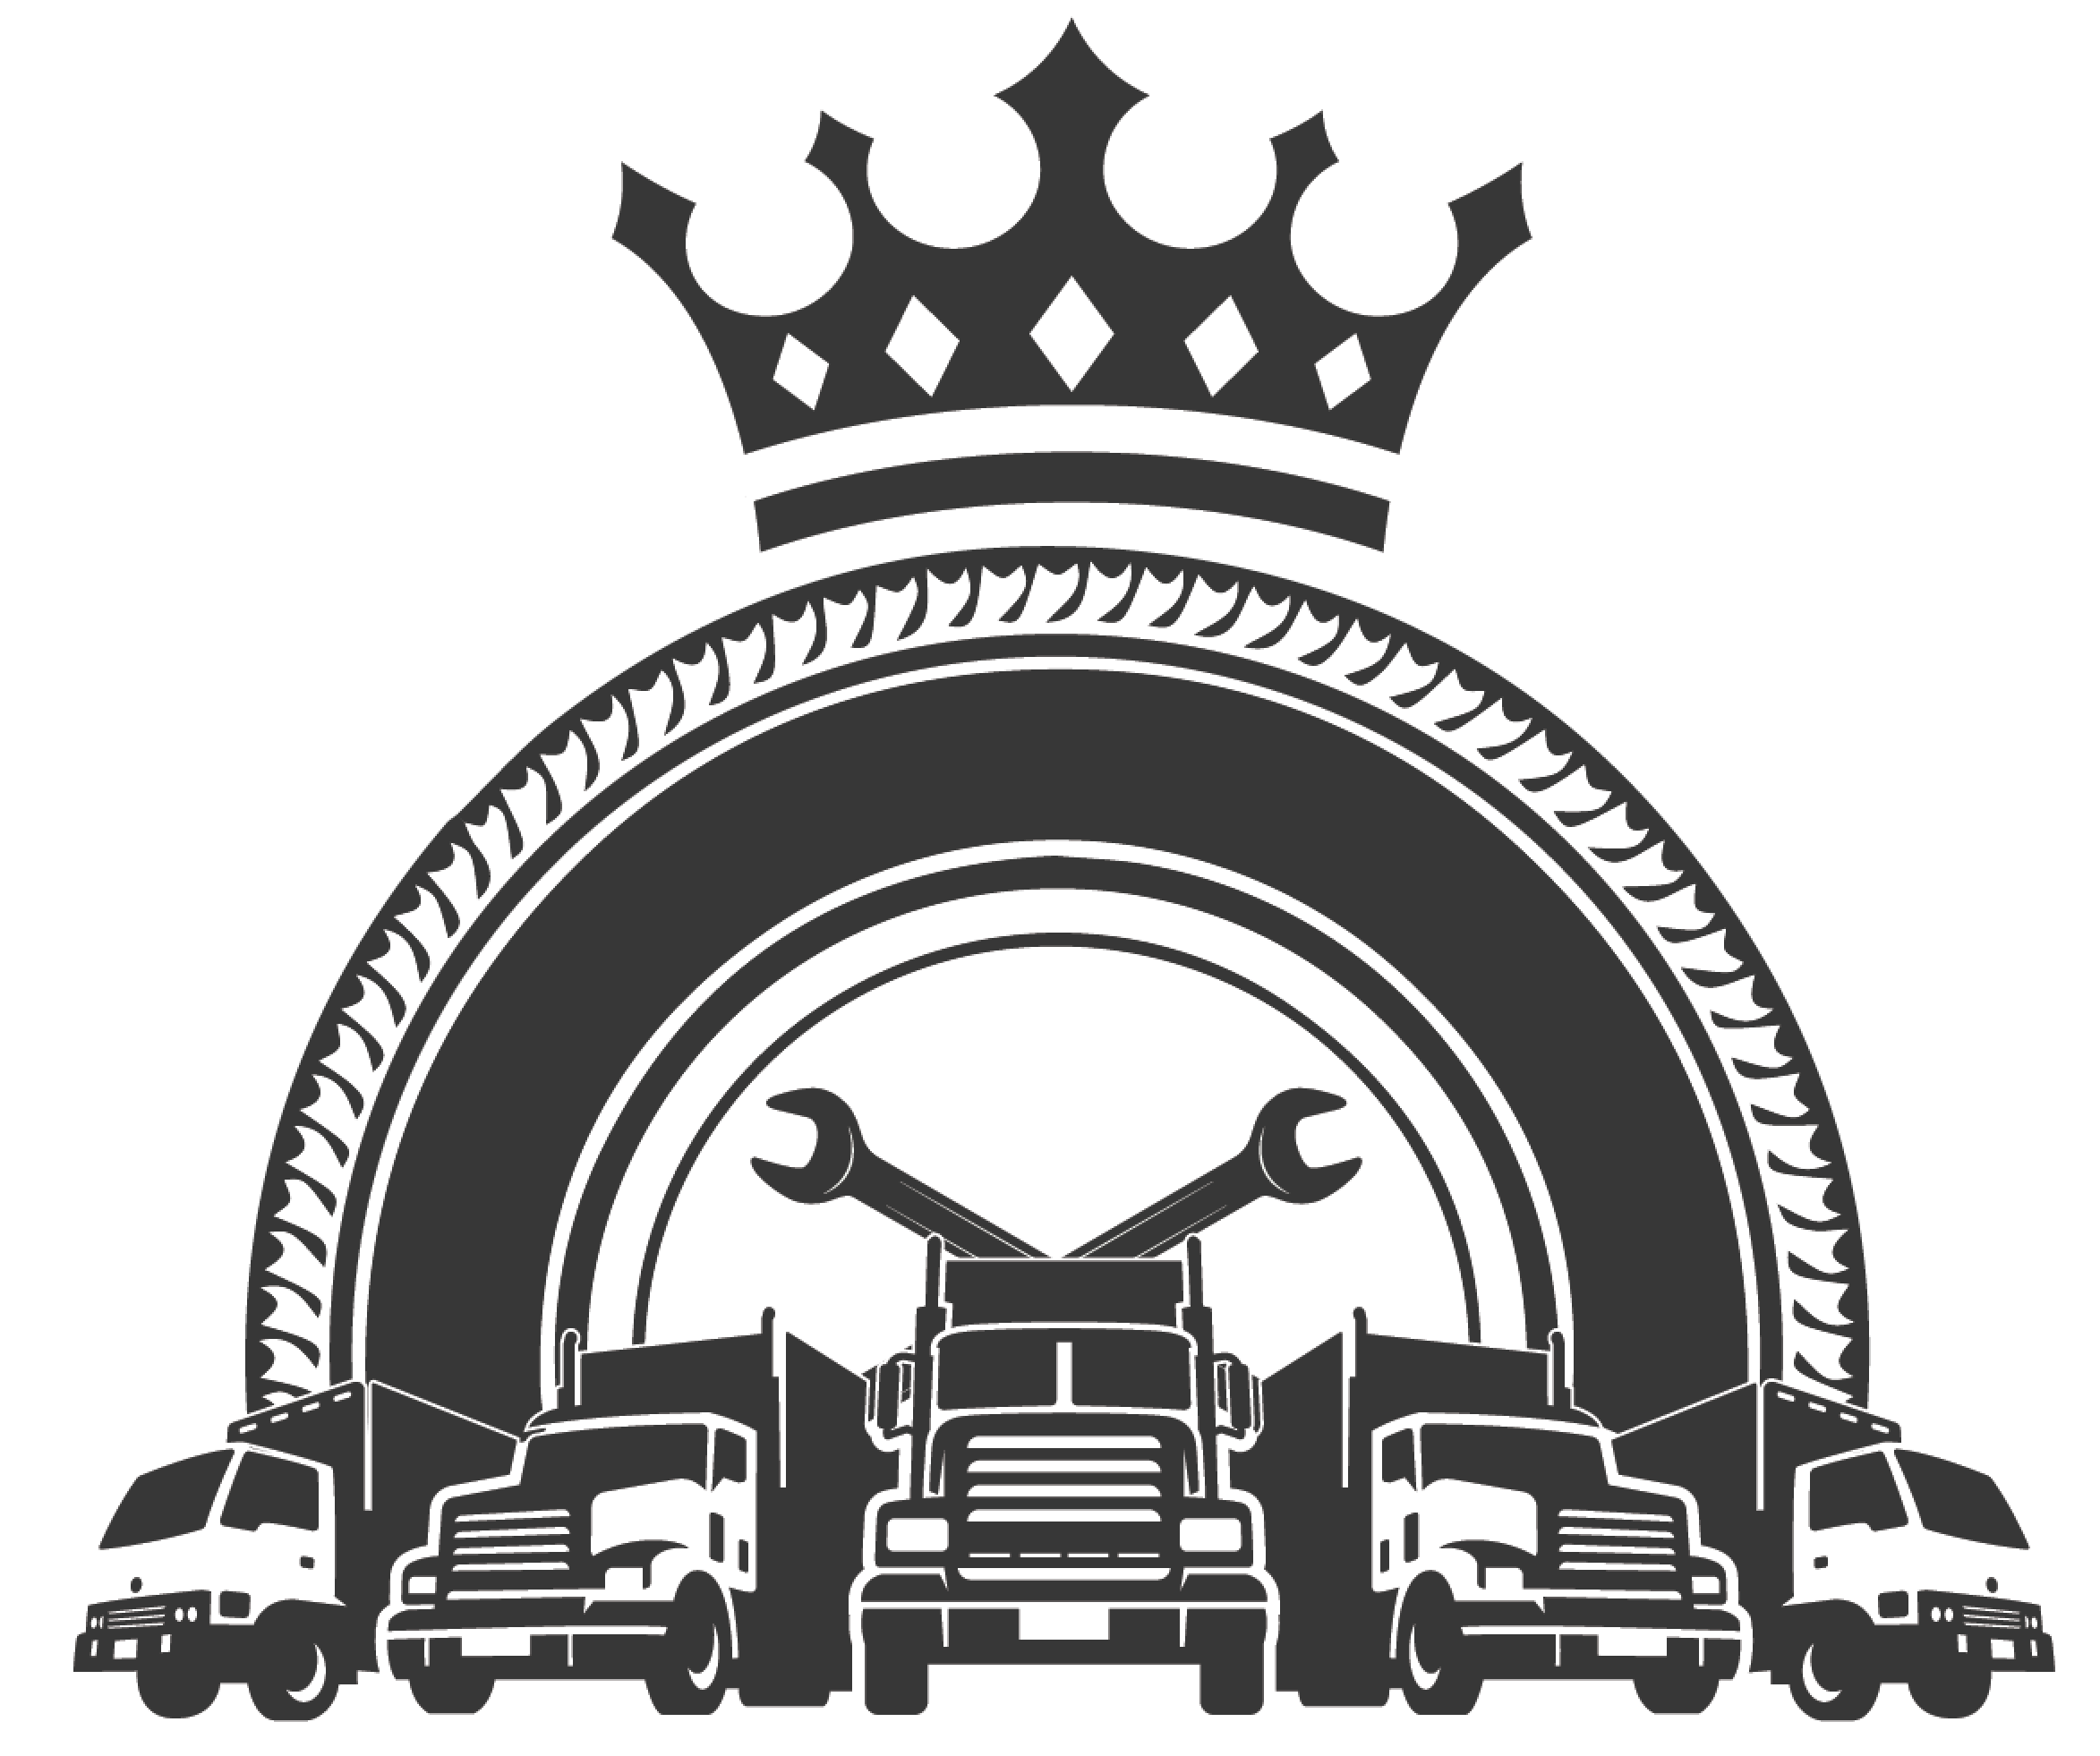 KINGS Trucking and Accessories LLC.